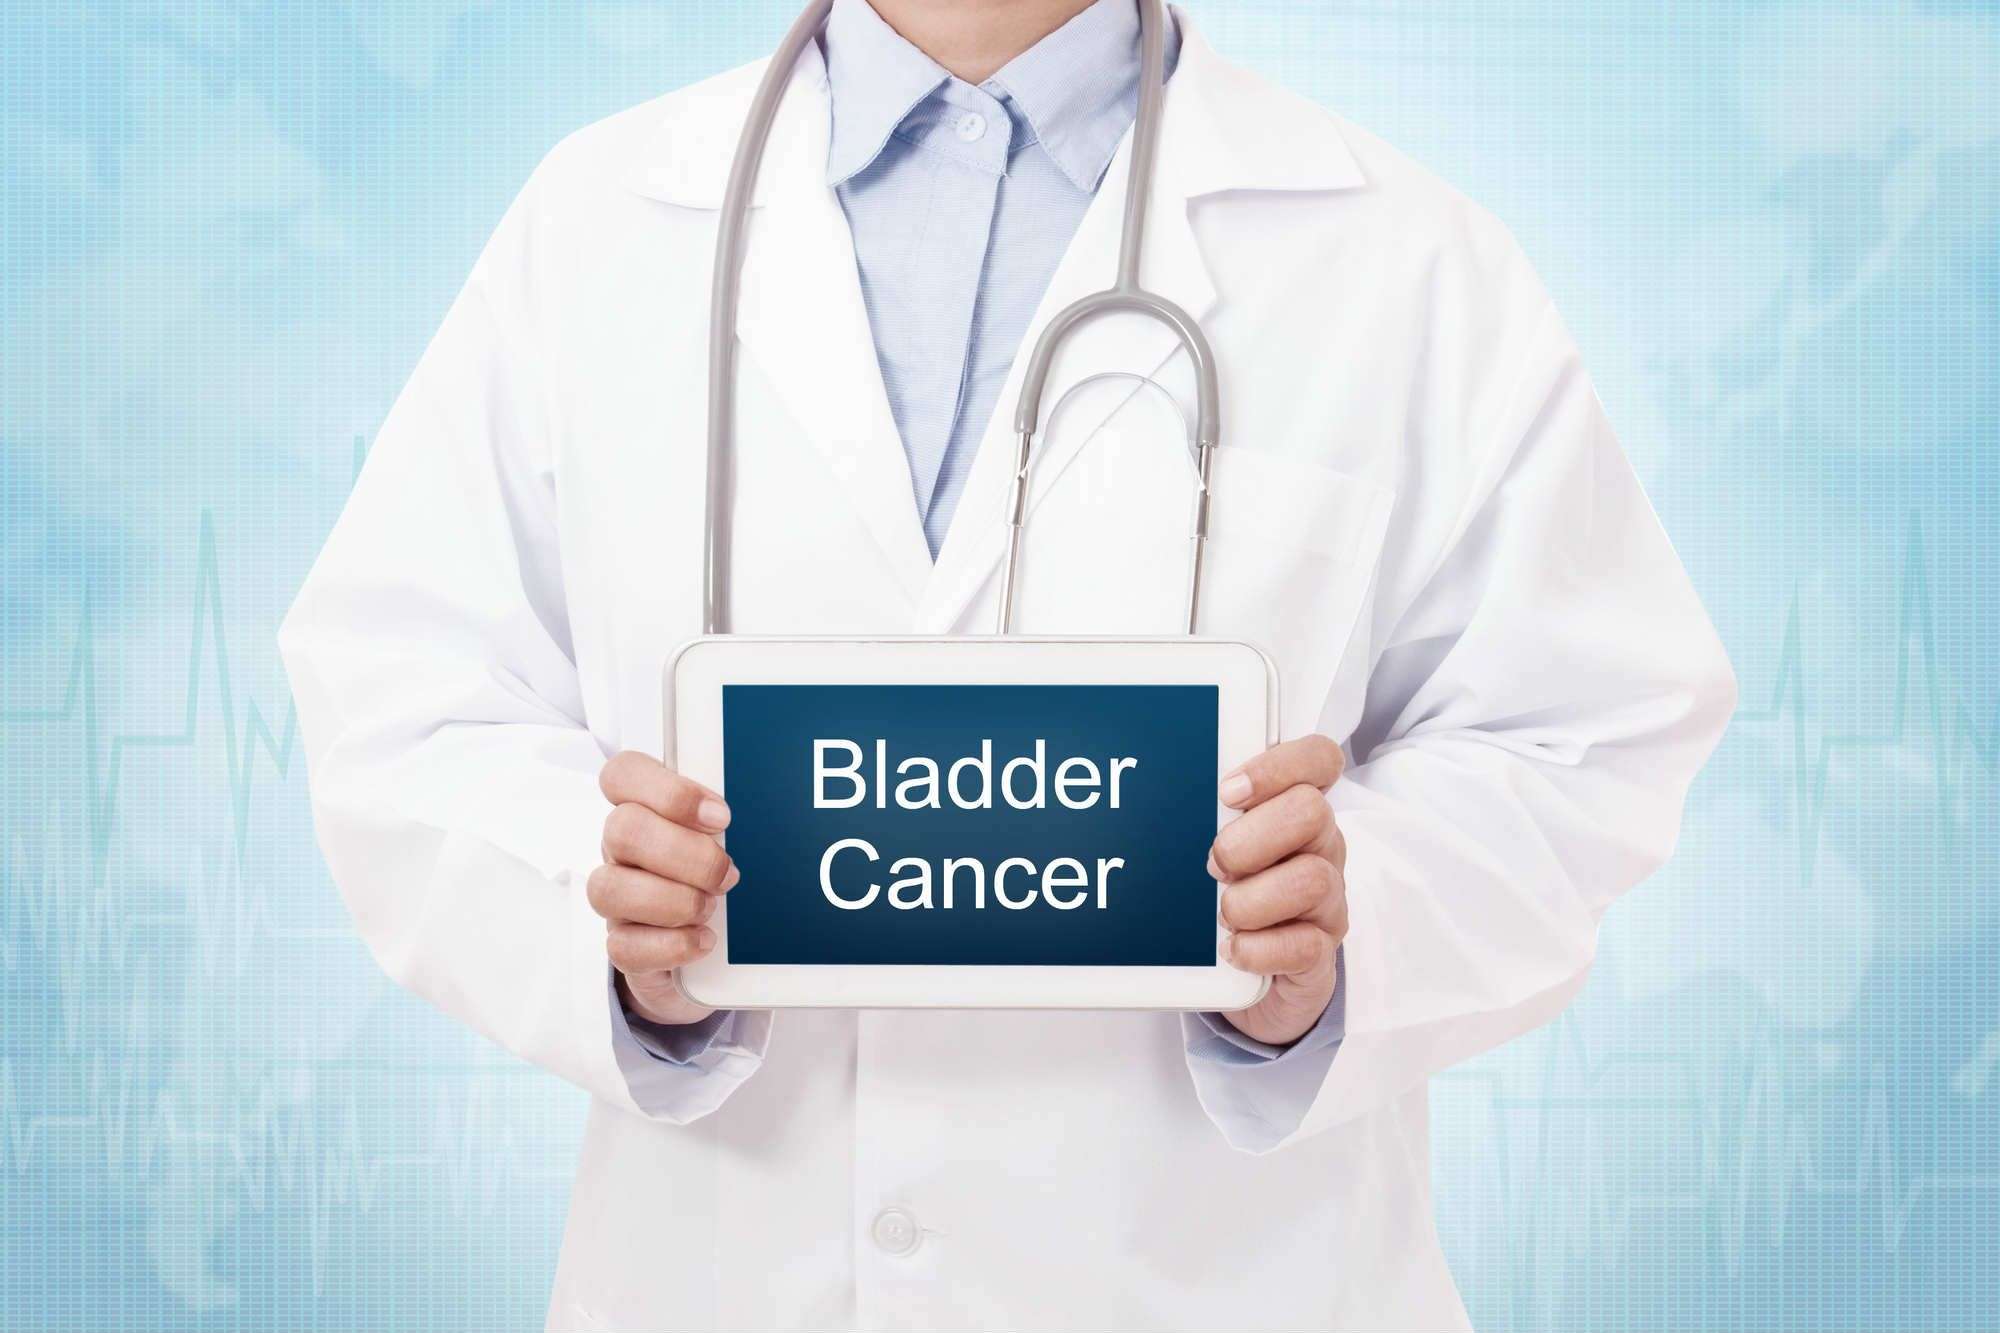 Actos and Bladder Cancer Lawsuit Blames Illness on Lack of ...